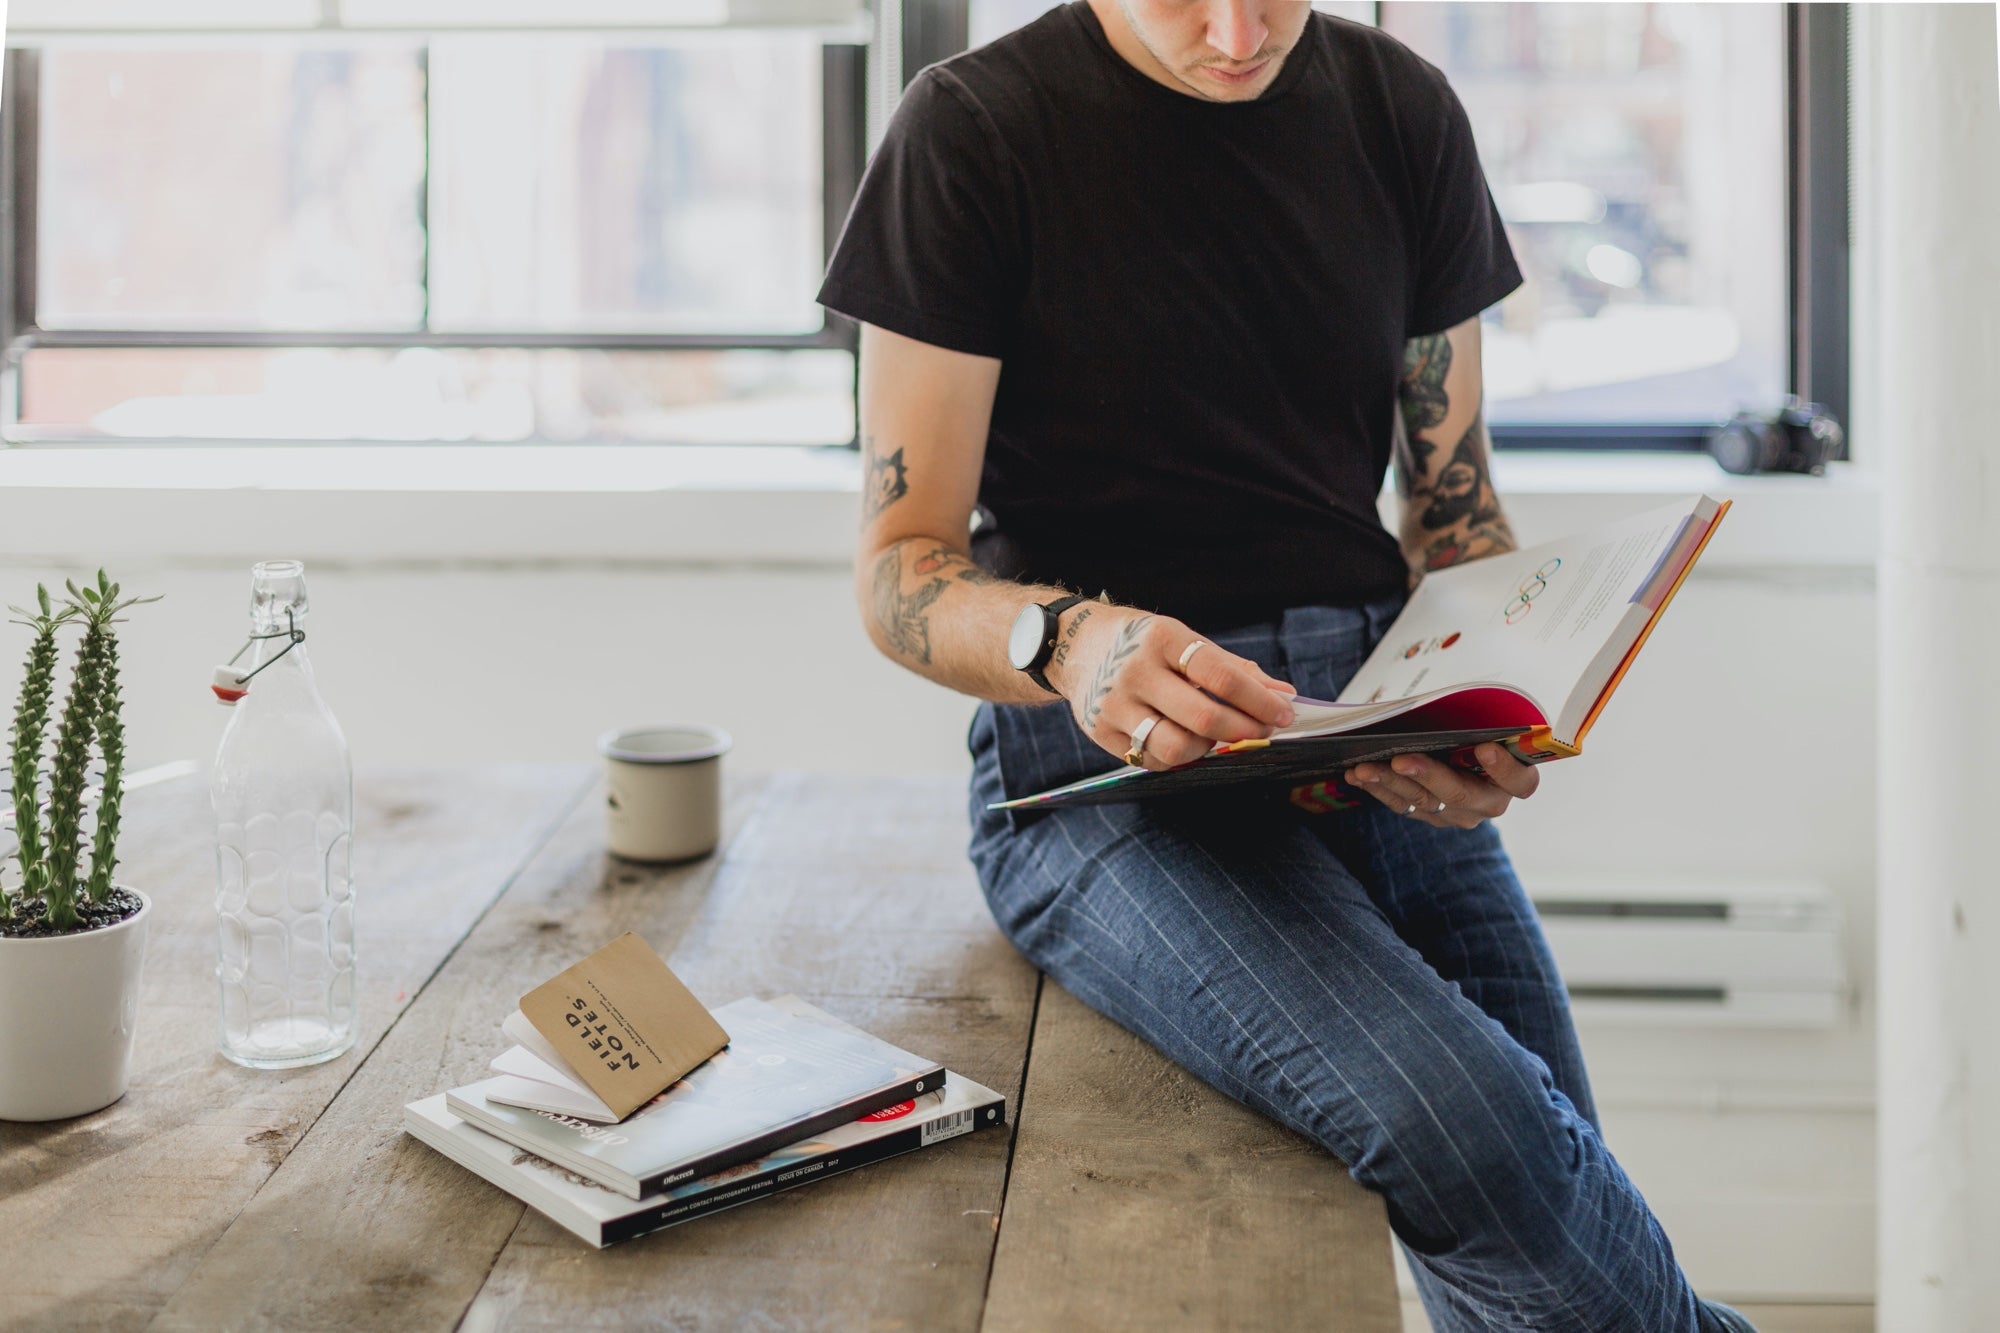 Man with tattoos sits on a table thumbing through a book